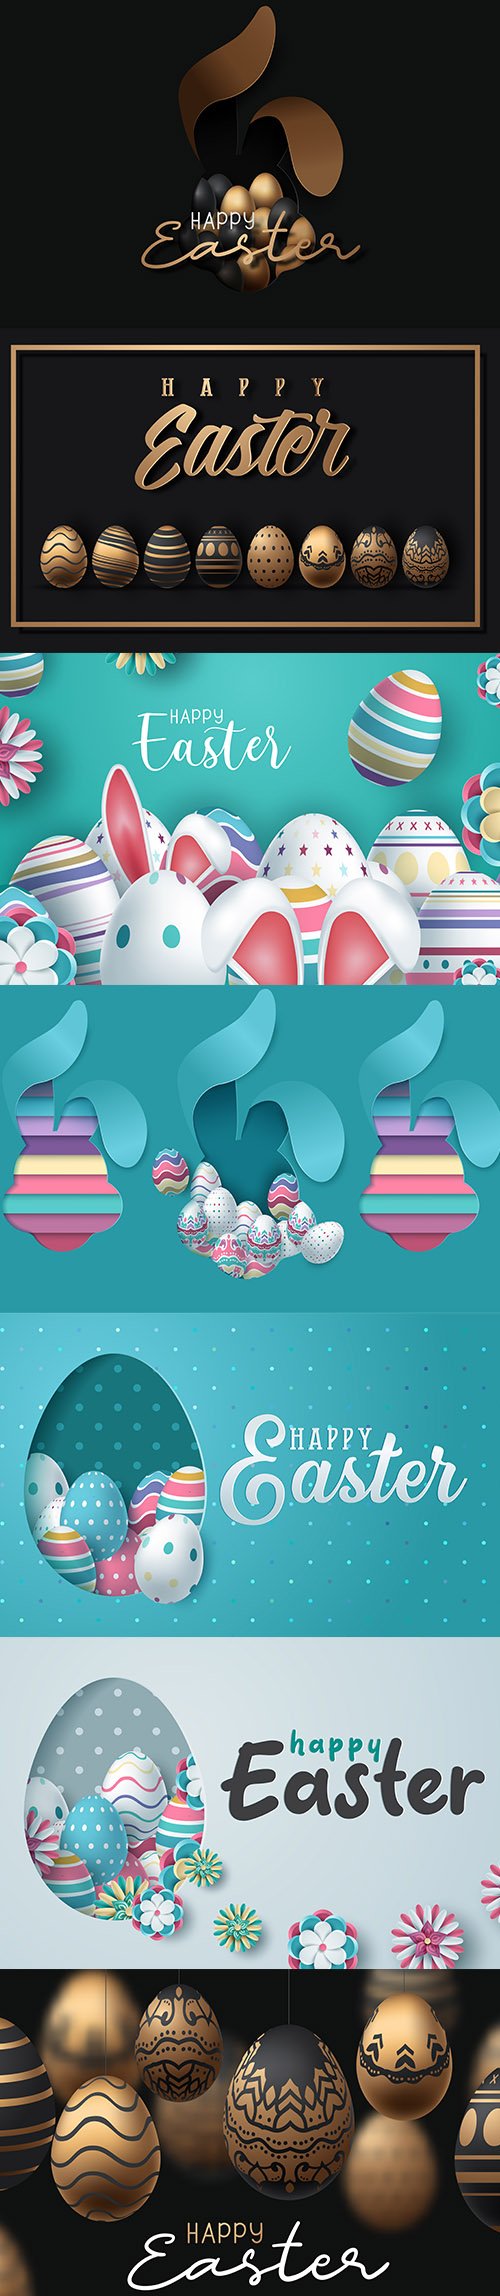 Happy Easter Background with Painted Egg Vol 2